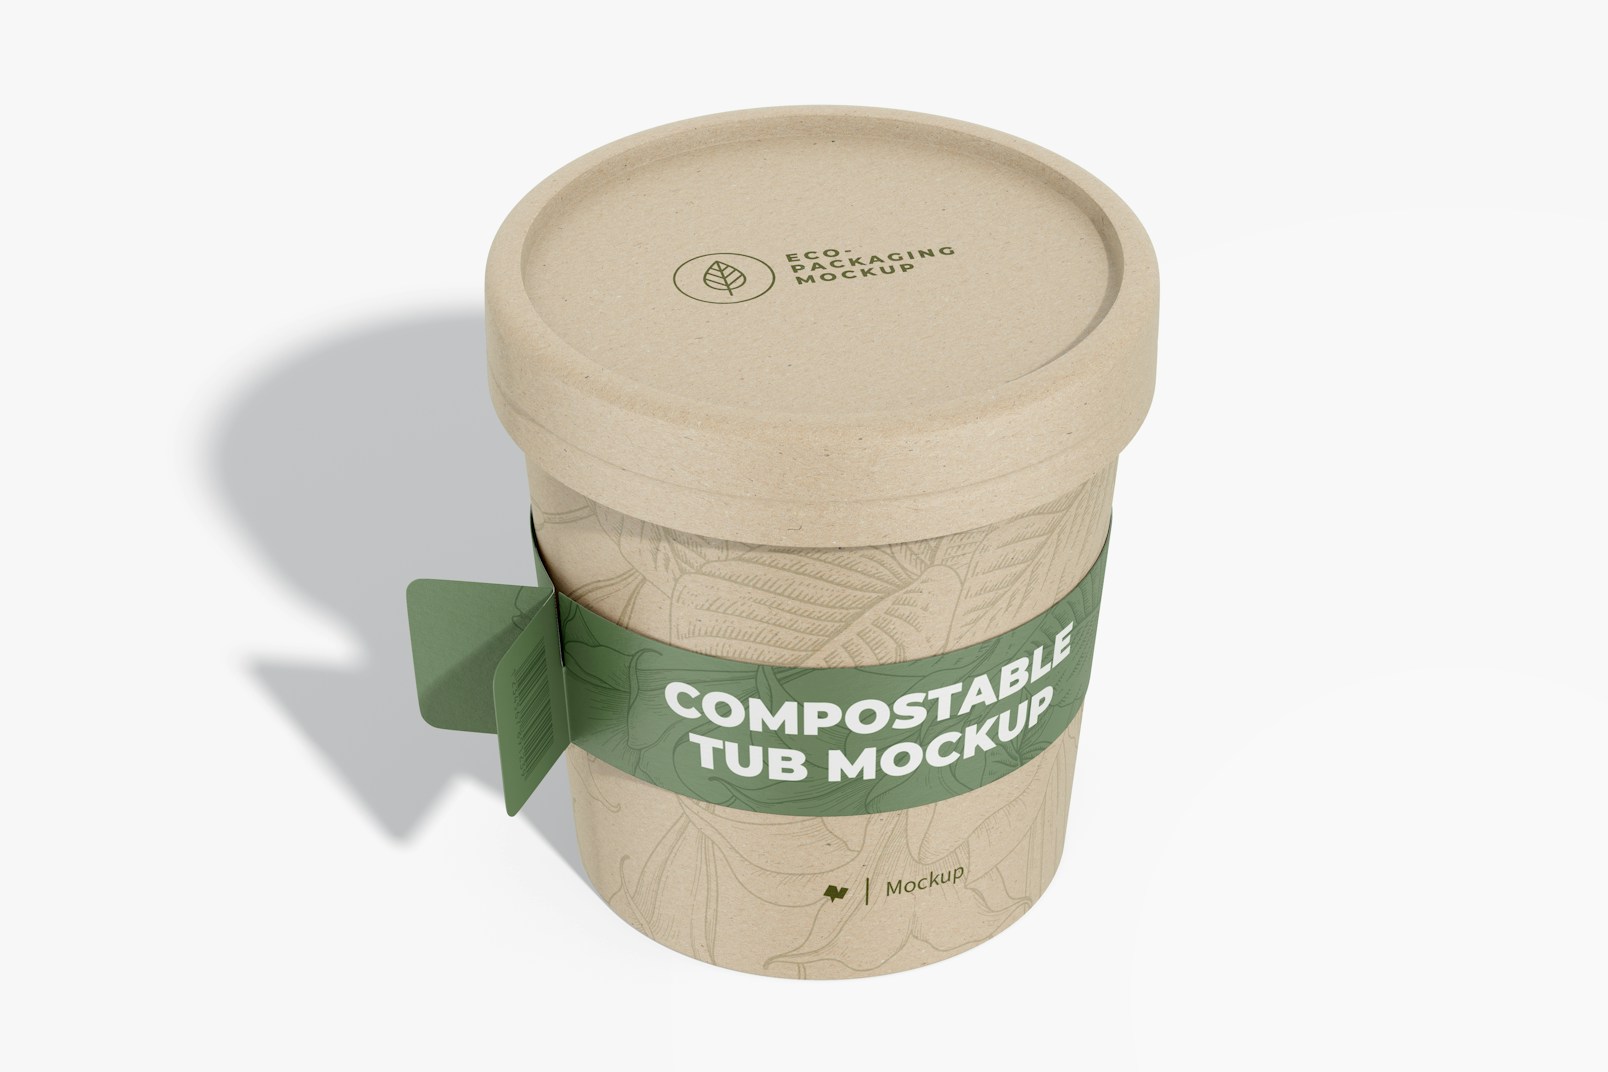 Compostable Tub with Label Mockup, Perspective